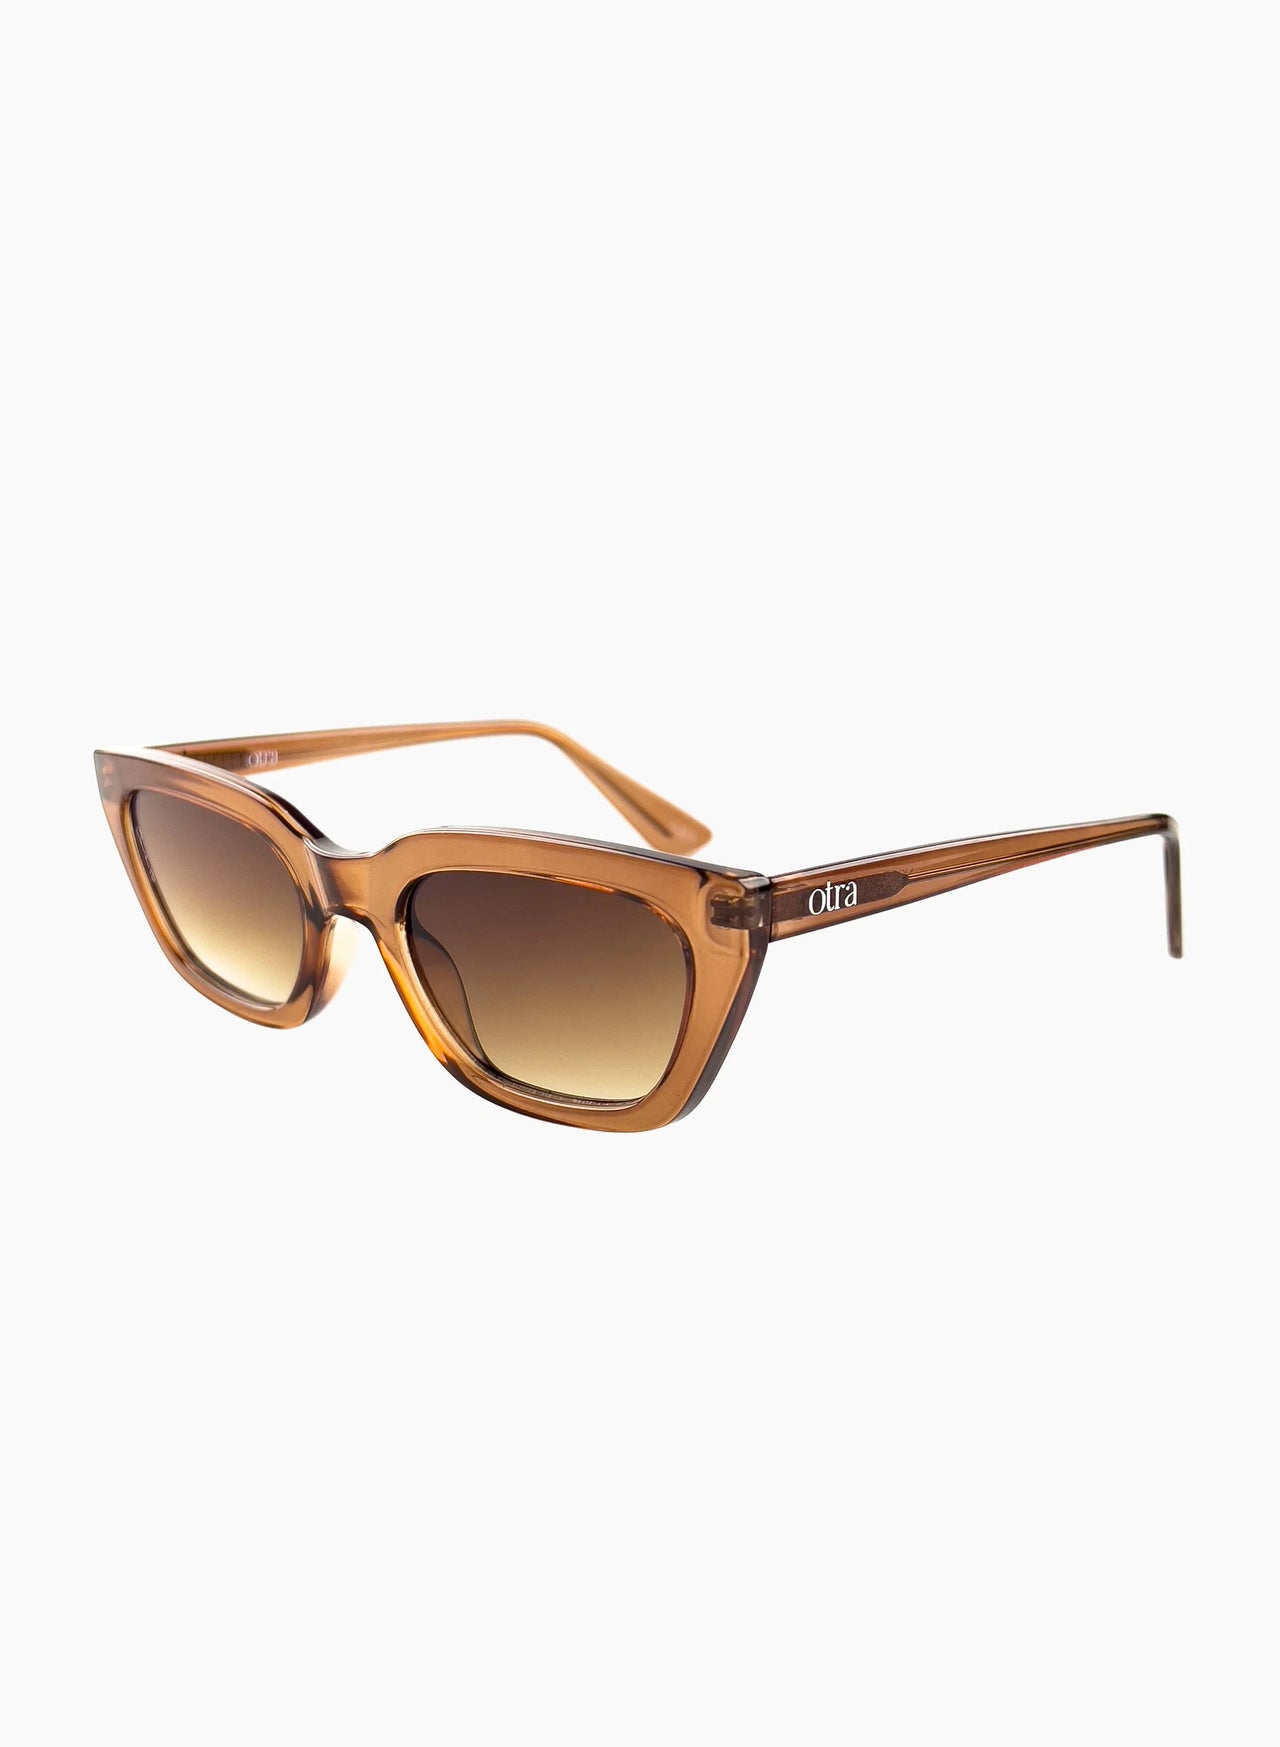 The Nove Sunglasses Coffee Brown, Sunglasses Acc by Otra Eyewear | LIT Boutique